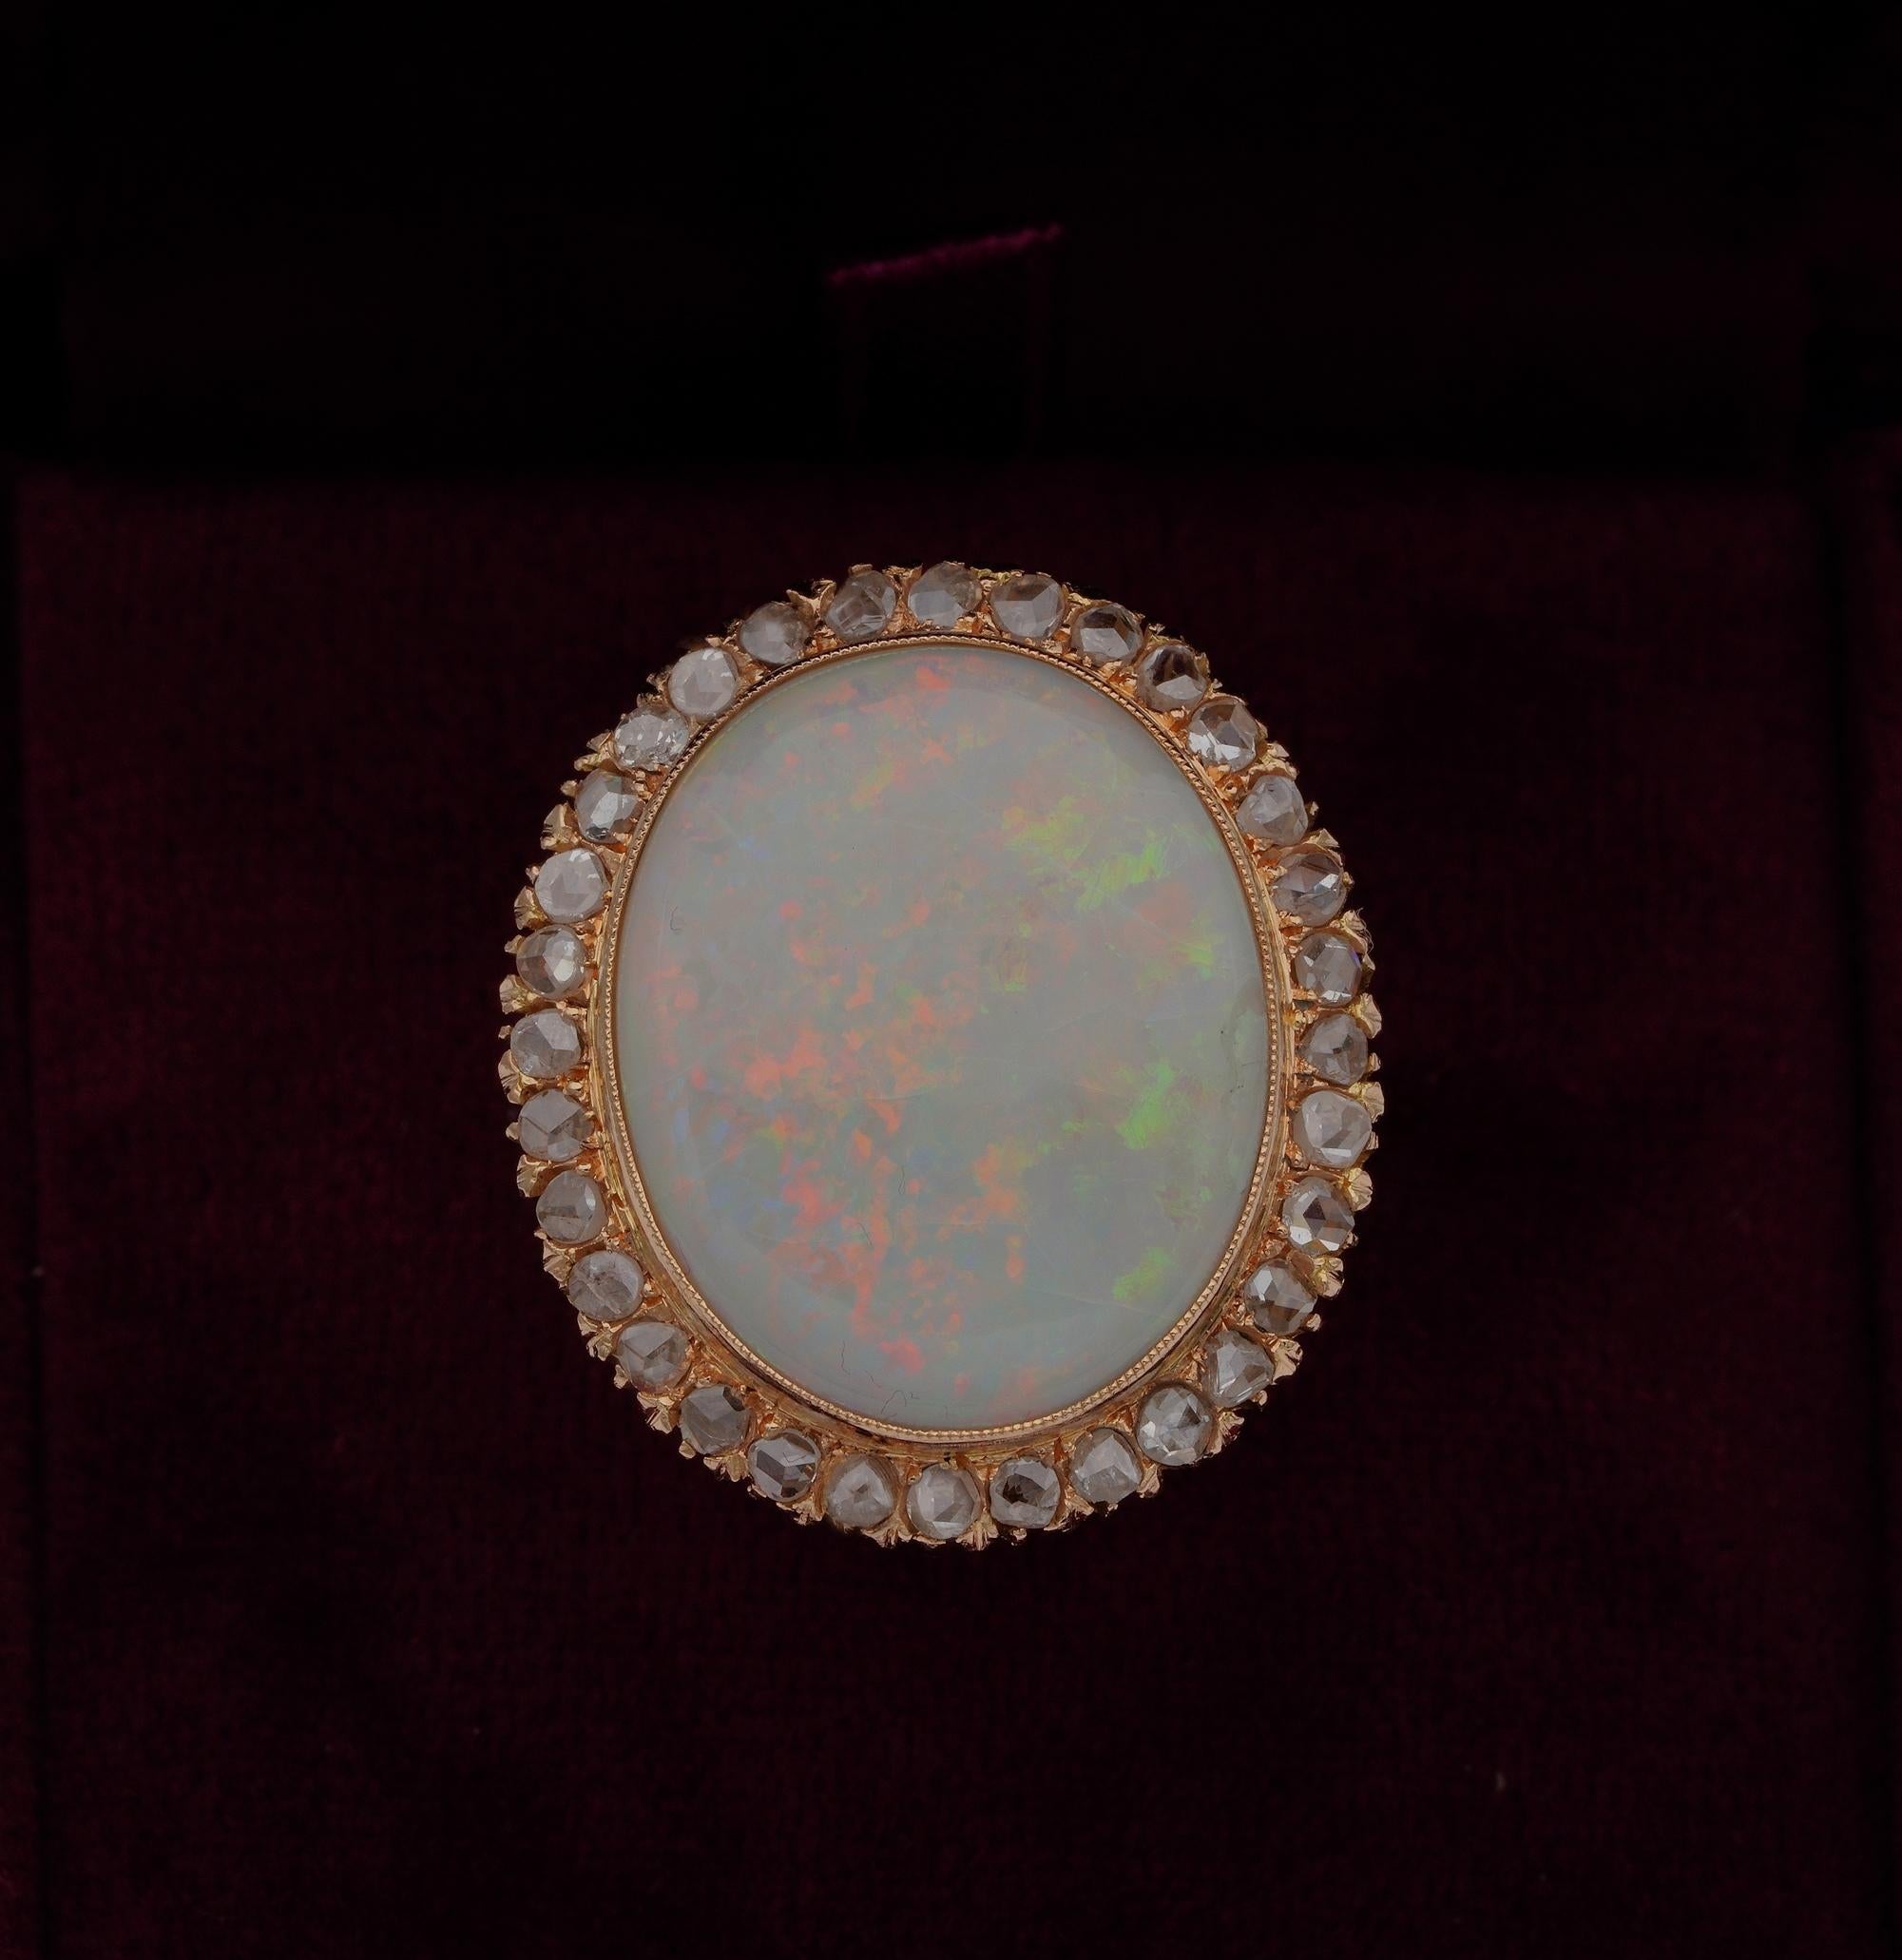 This remarkable Retro Opal & Diamond ring is 1940 ca
Hand crafted in a skillfully manner of solid 18 KT gold
Classy in design consisting in a centre large Opal set in a halo of rose cut Diamonds and lovely leaf open work delineating the sides and